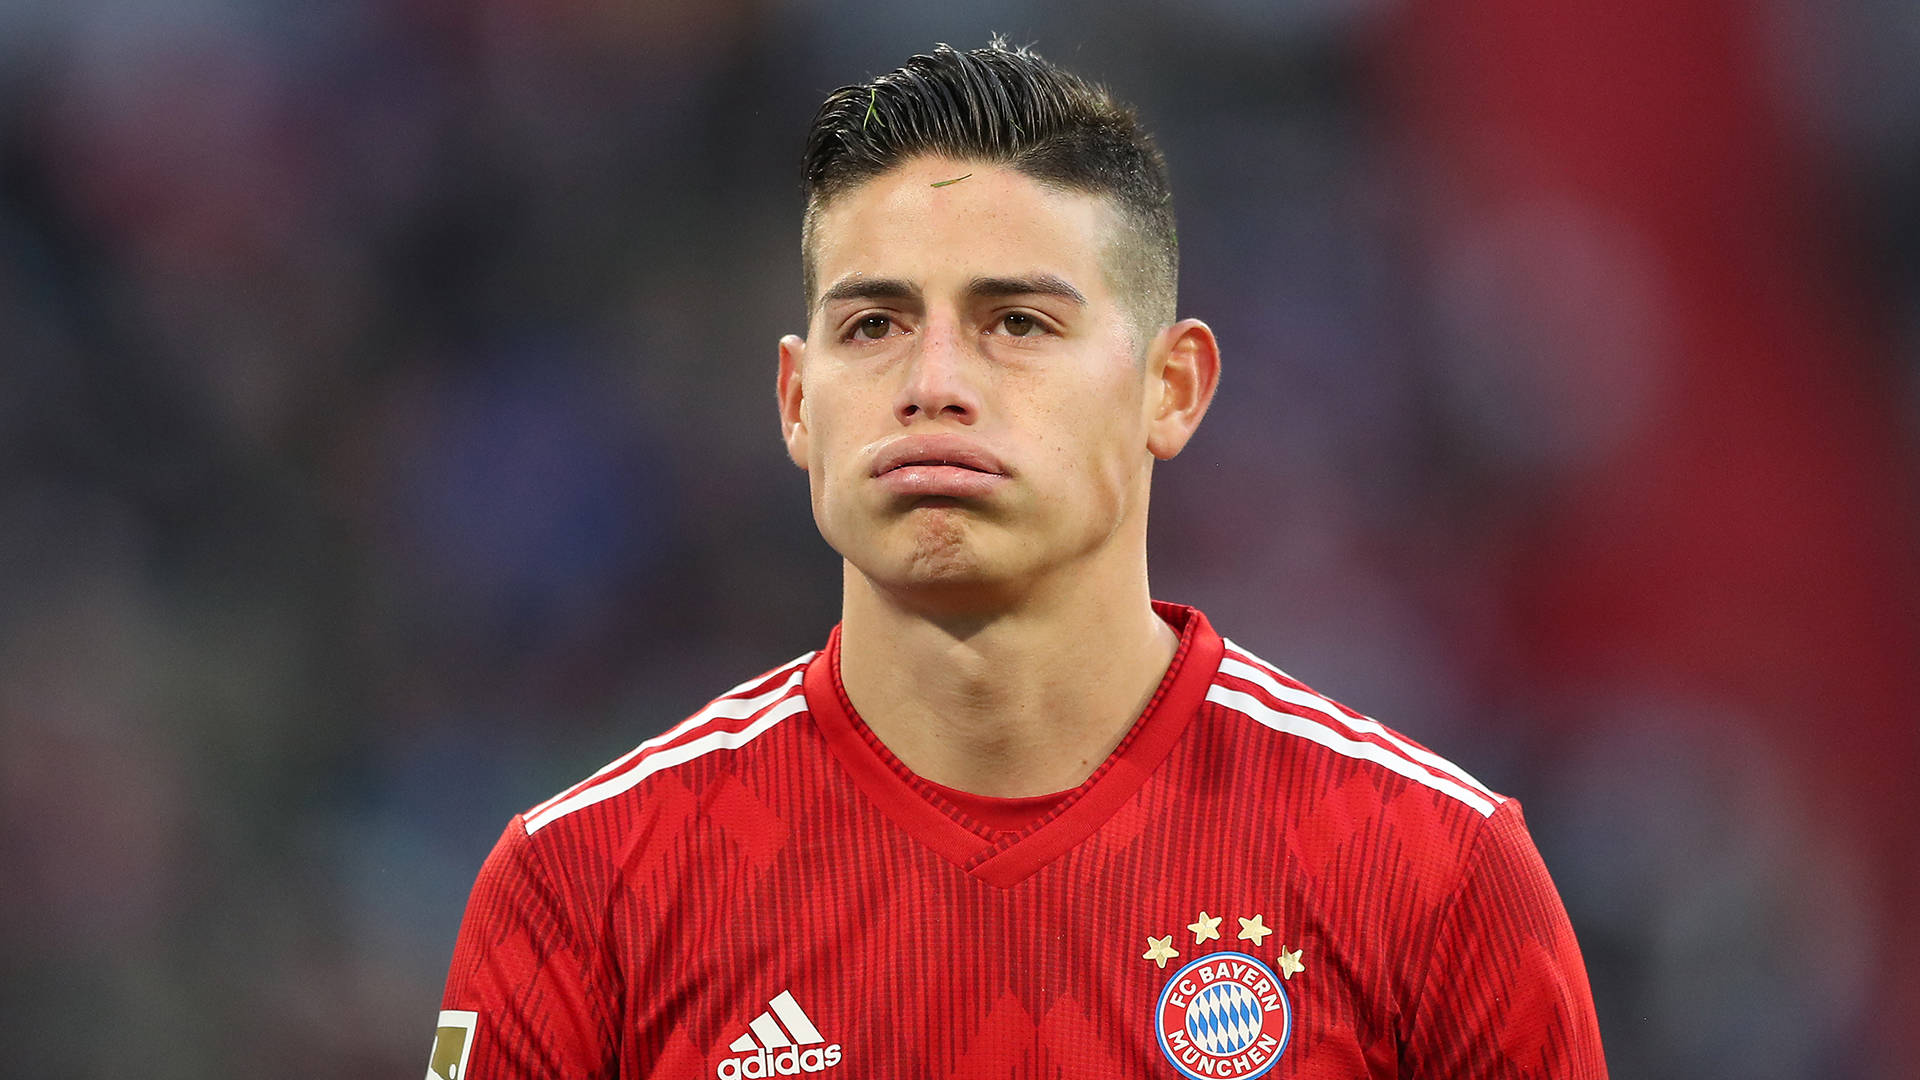 Cute James Rodriguez Expression Background